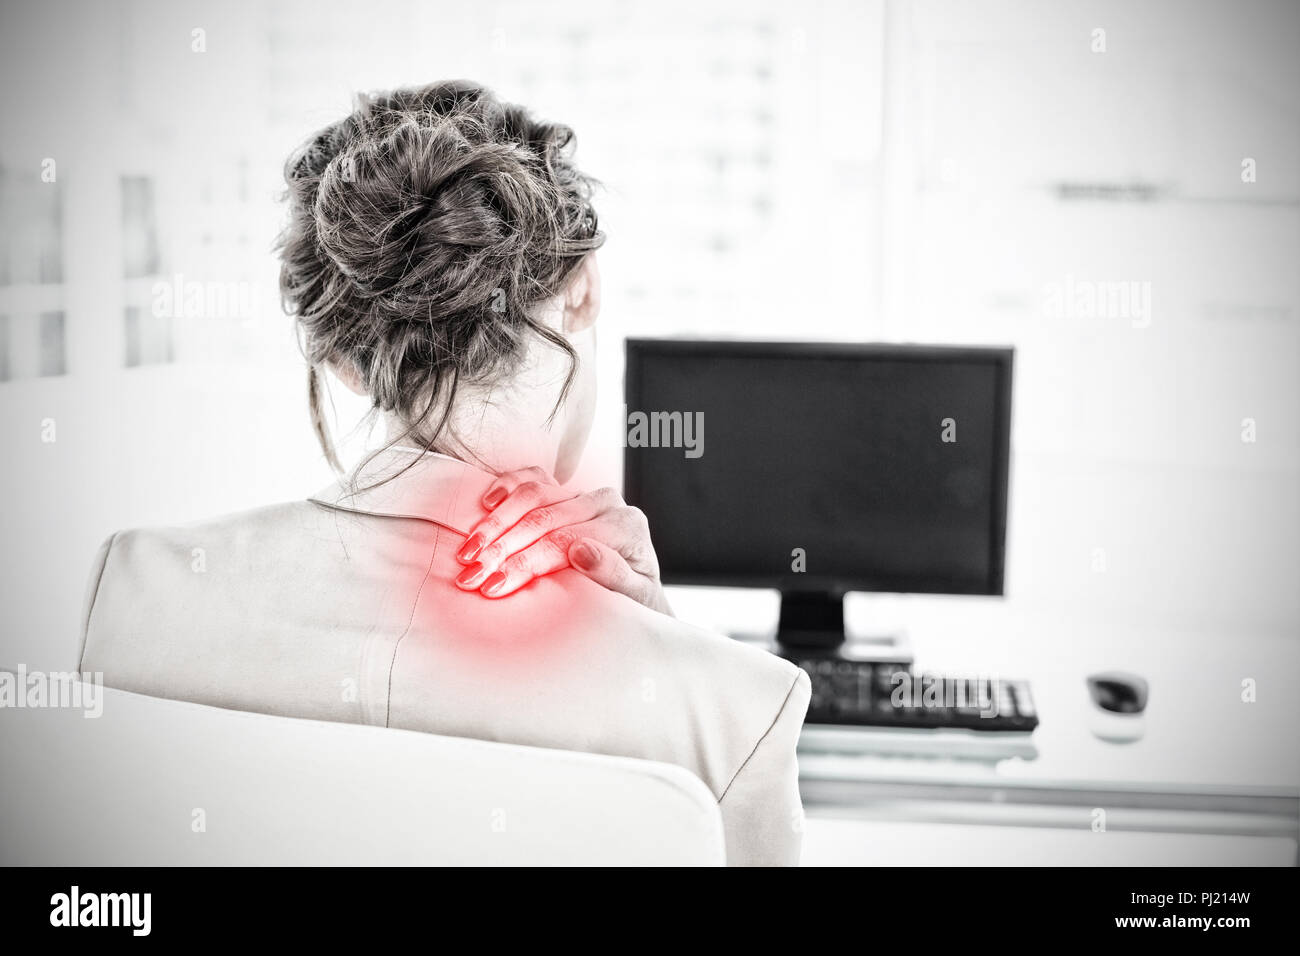 Composite image of rear view of businesswoman with neck pain in office Stock Photo